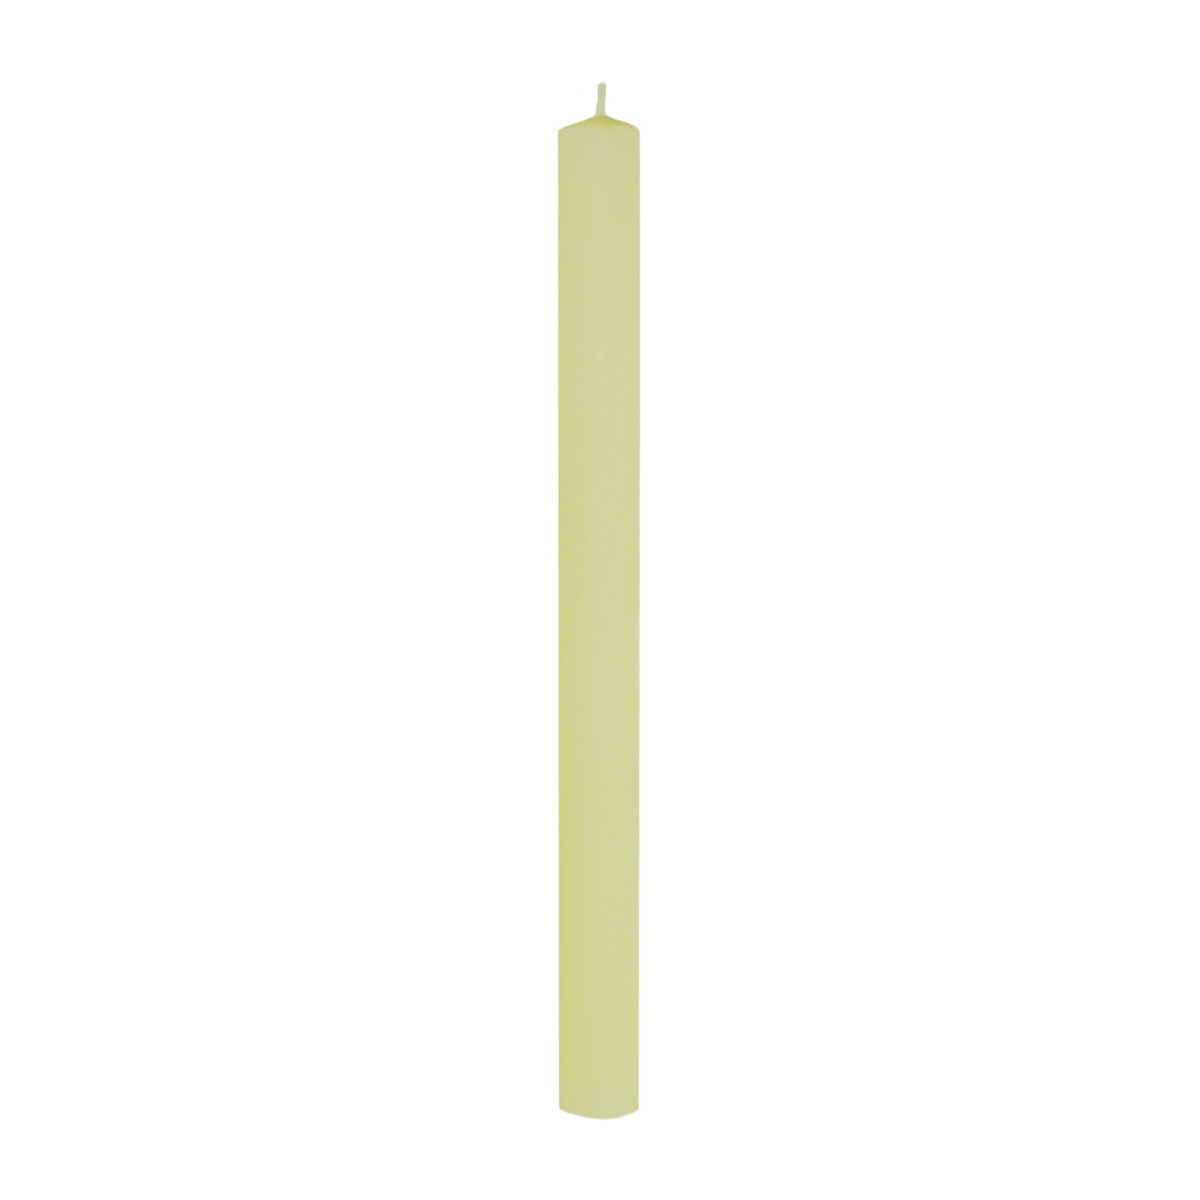 100% BEESWAX 1-1/2" x 12-3/4" GROOVE BASE CANDLE STICK